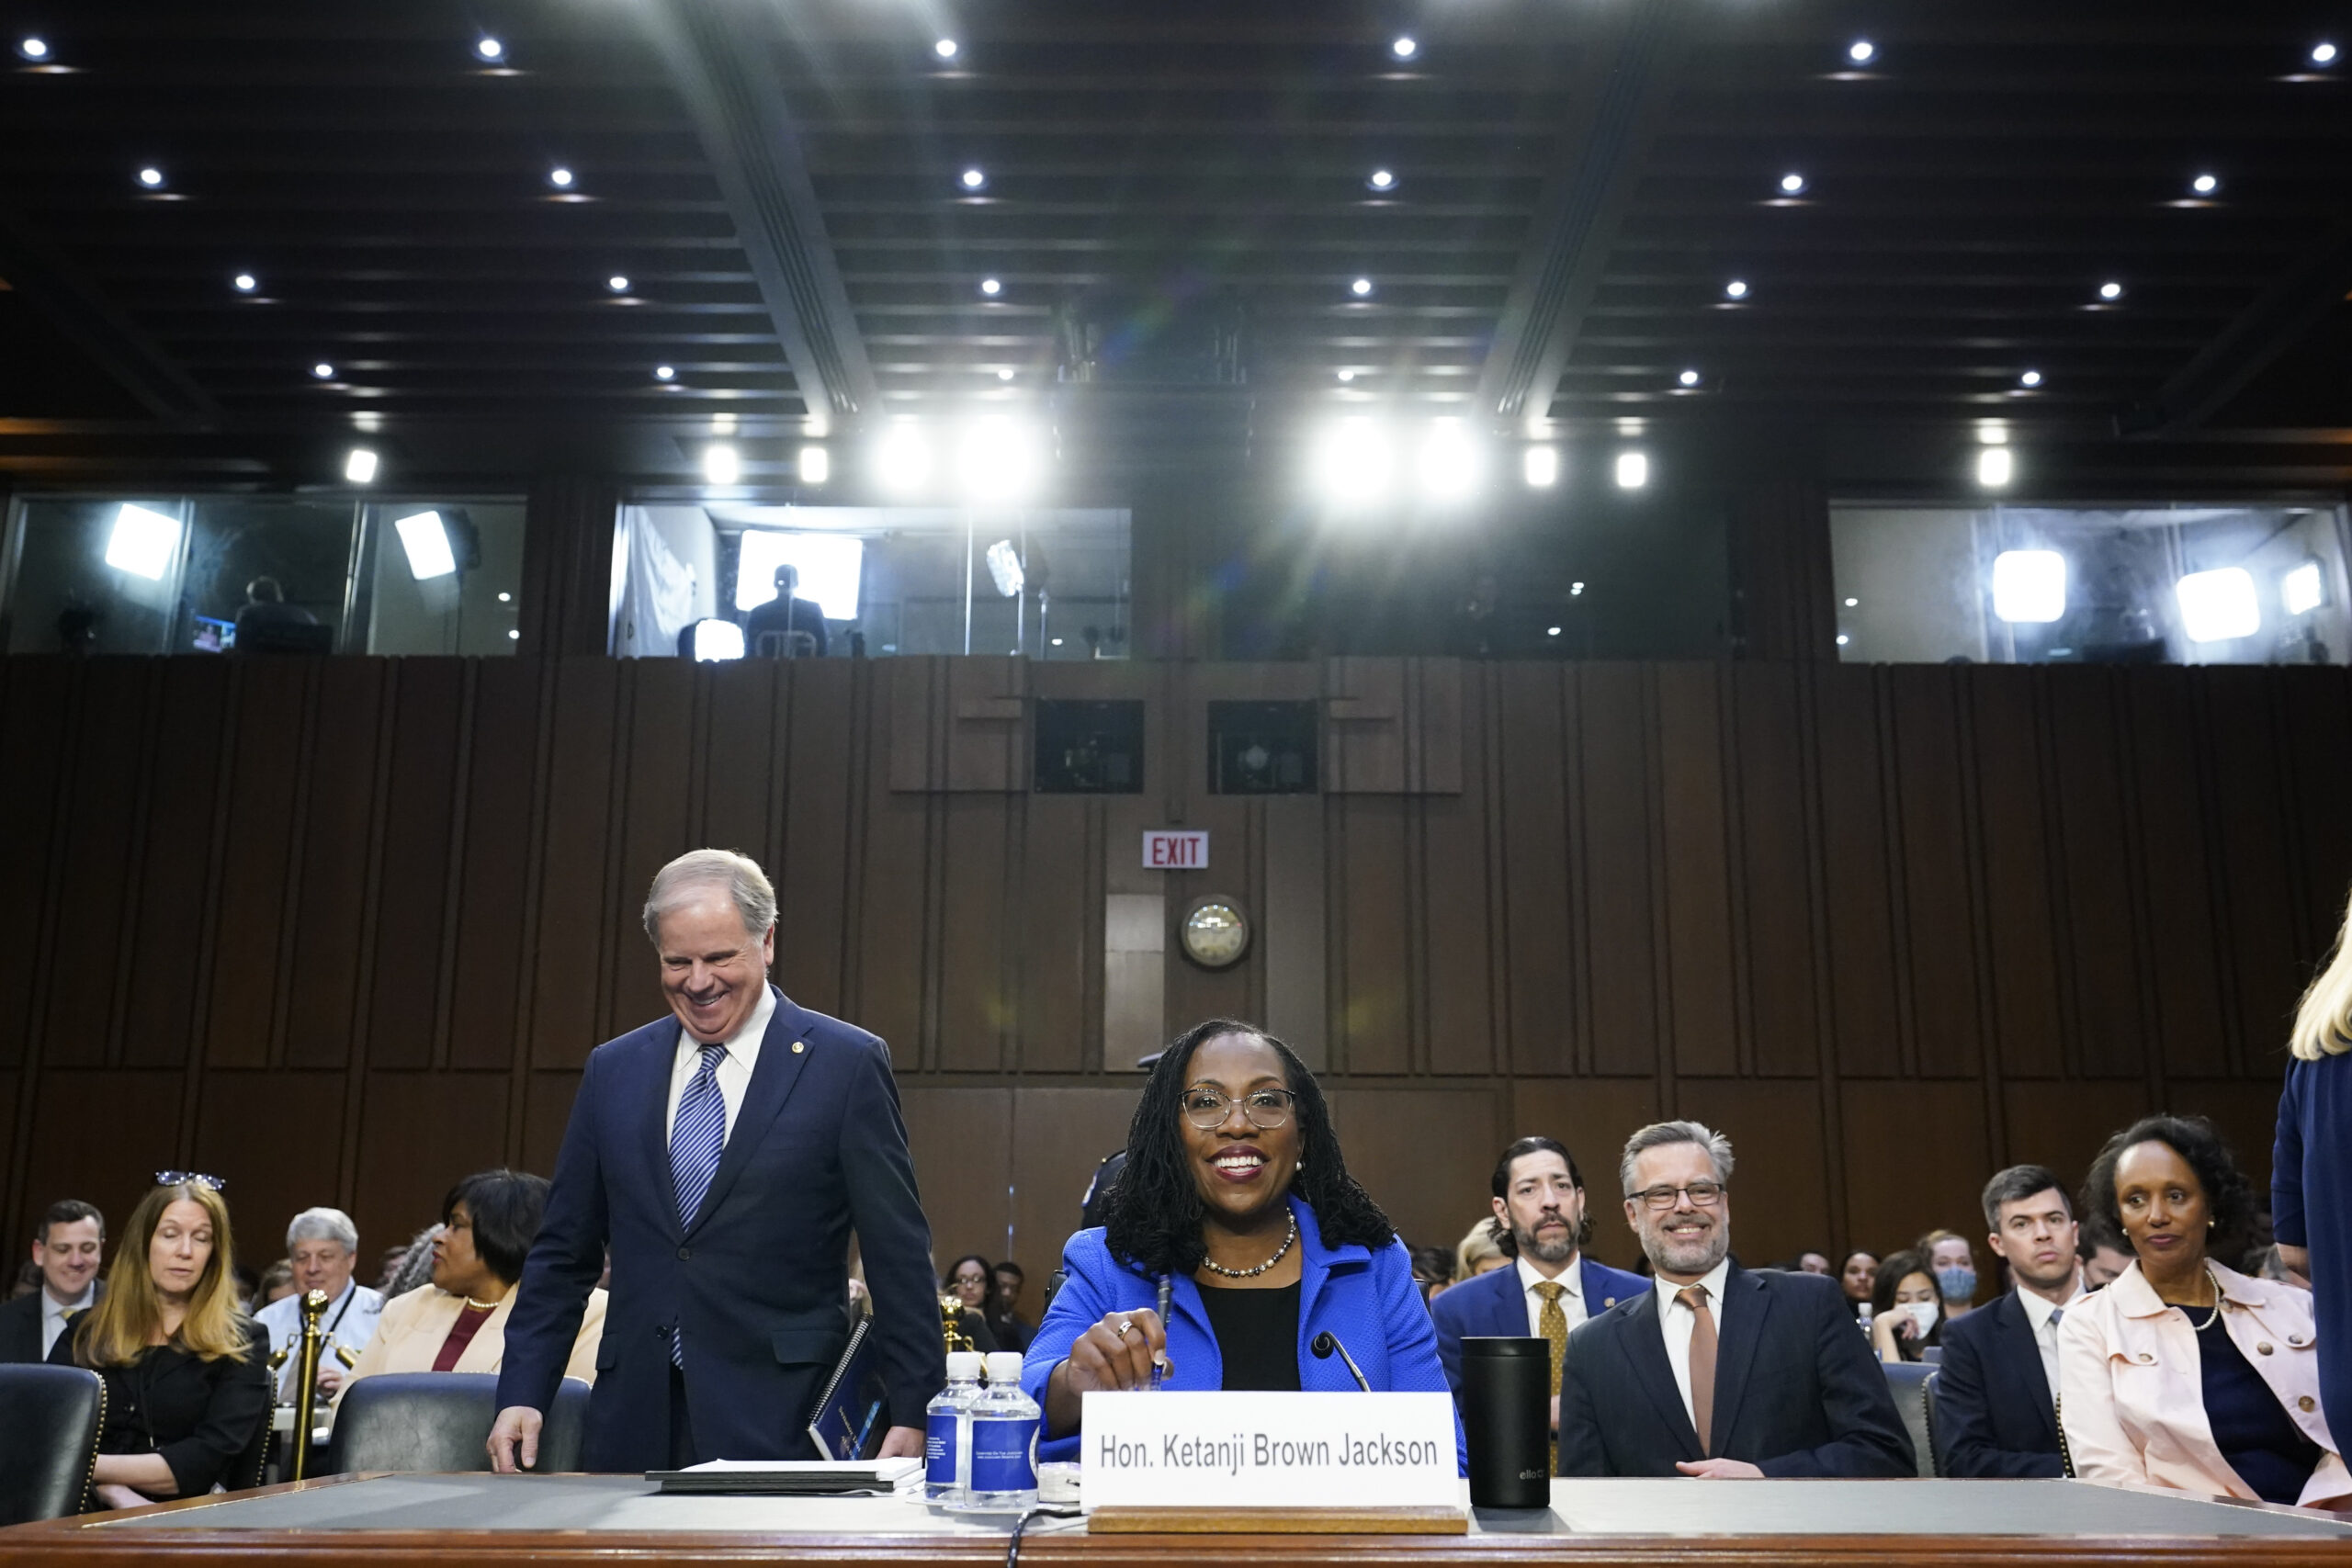 Supreme Court nominee Ketanji Brown Jackson returns from a break in her Senate Judiciary Committee confirmation hearing on Capitol Hill in Washington, Wednesday, March 23, 2022. Former Sen. Doug Jones, D-Ala., is at center left. (AP Photo/Alex Brandon)